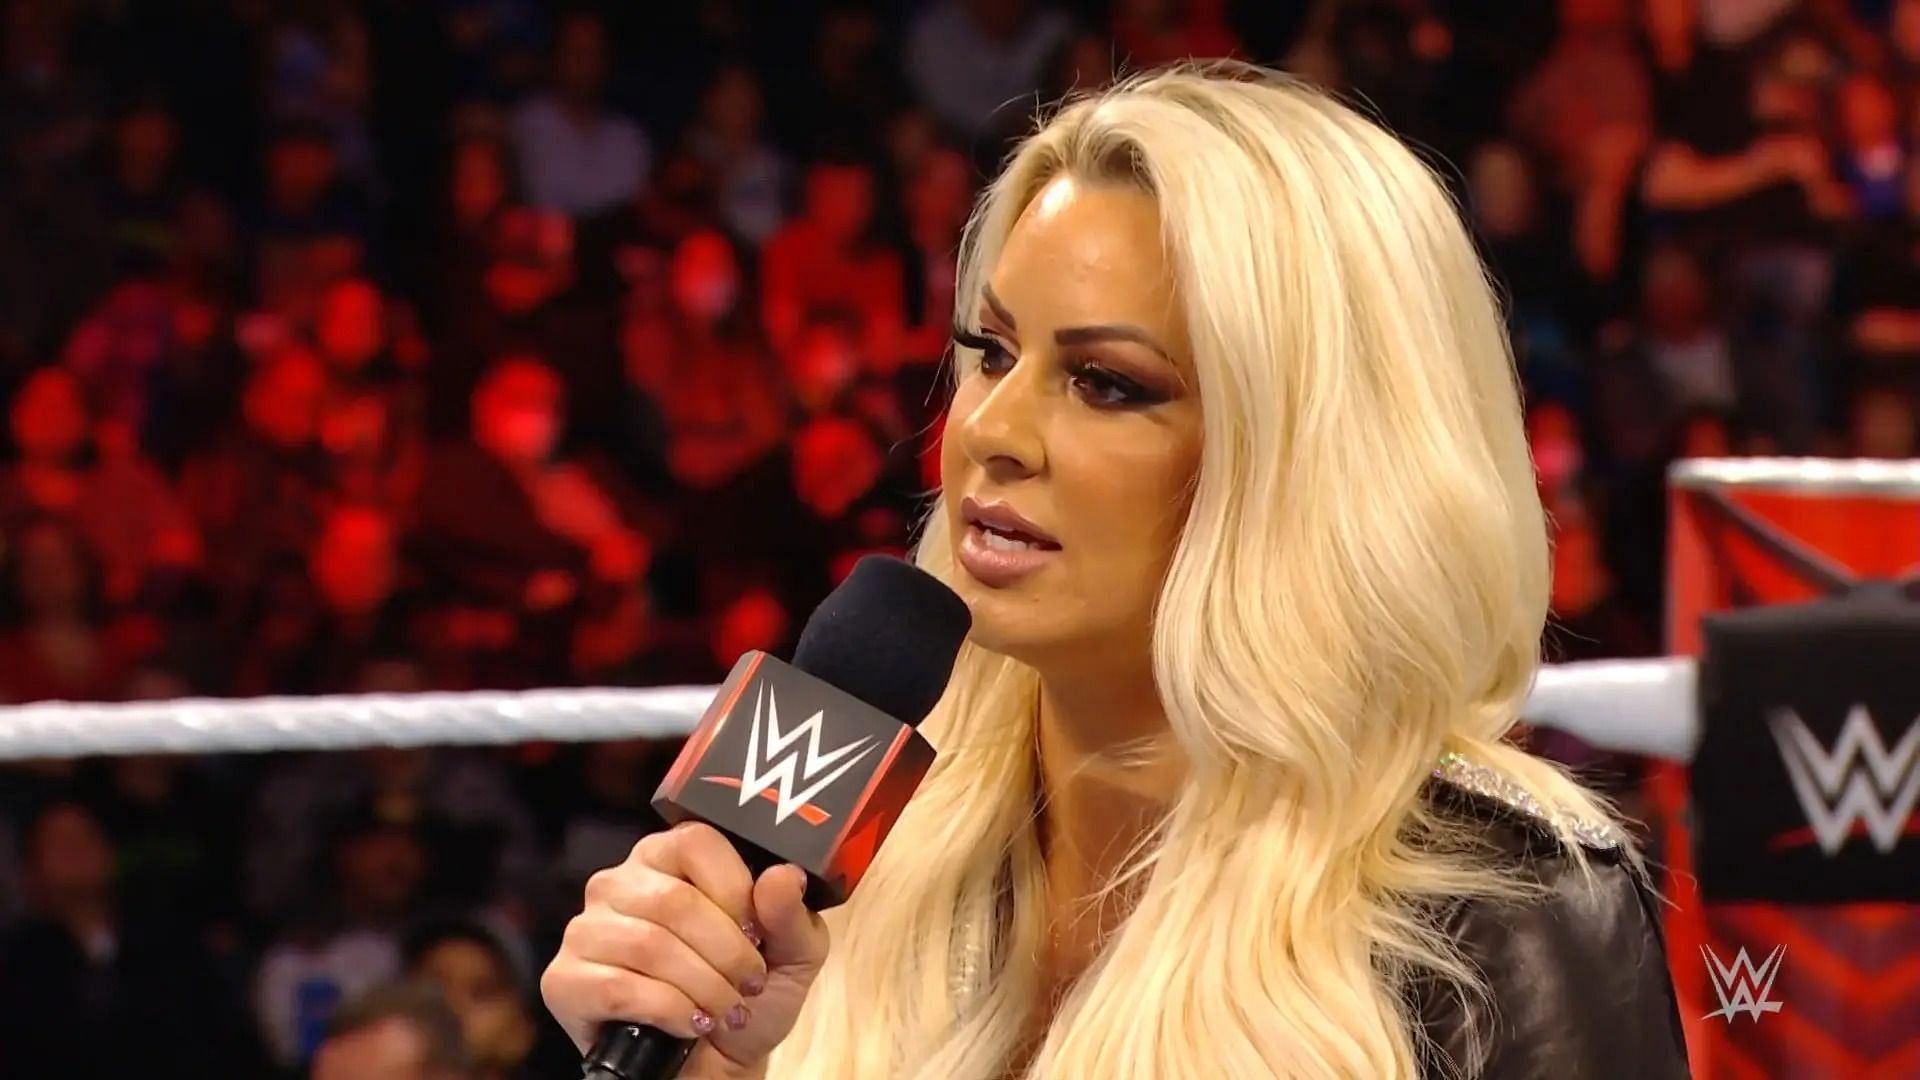 Maryse teased a potential in-ring return as a singles competitor this year!